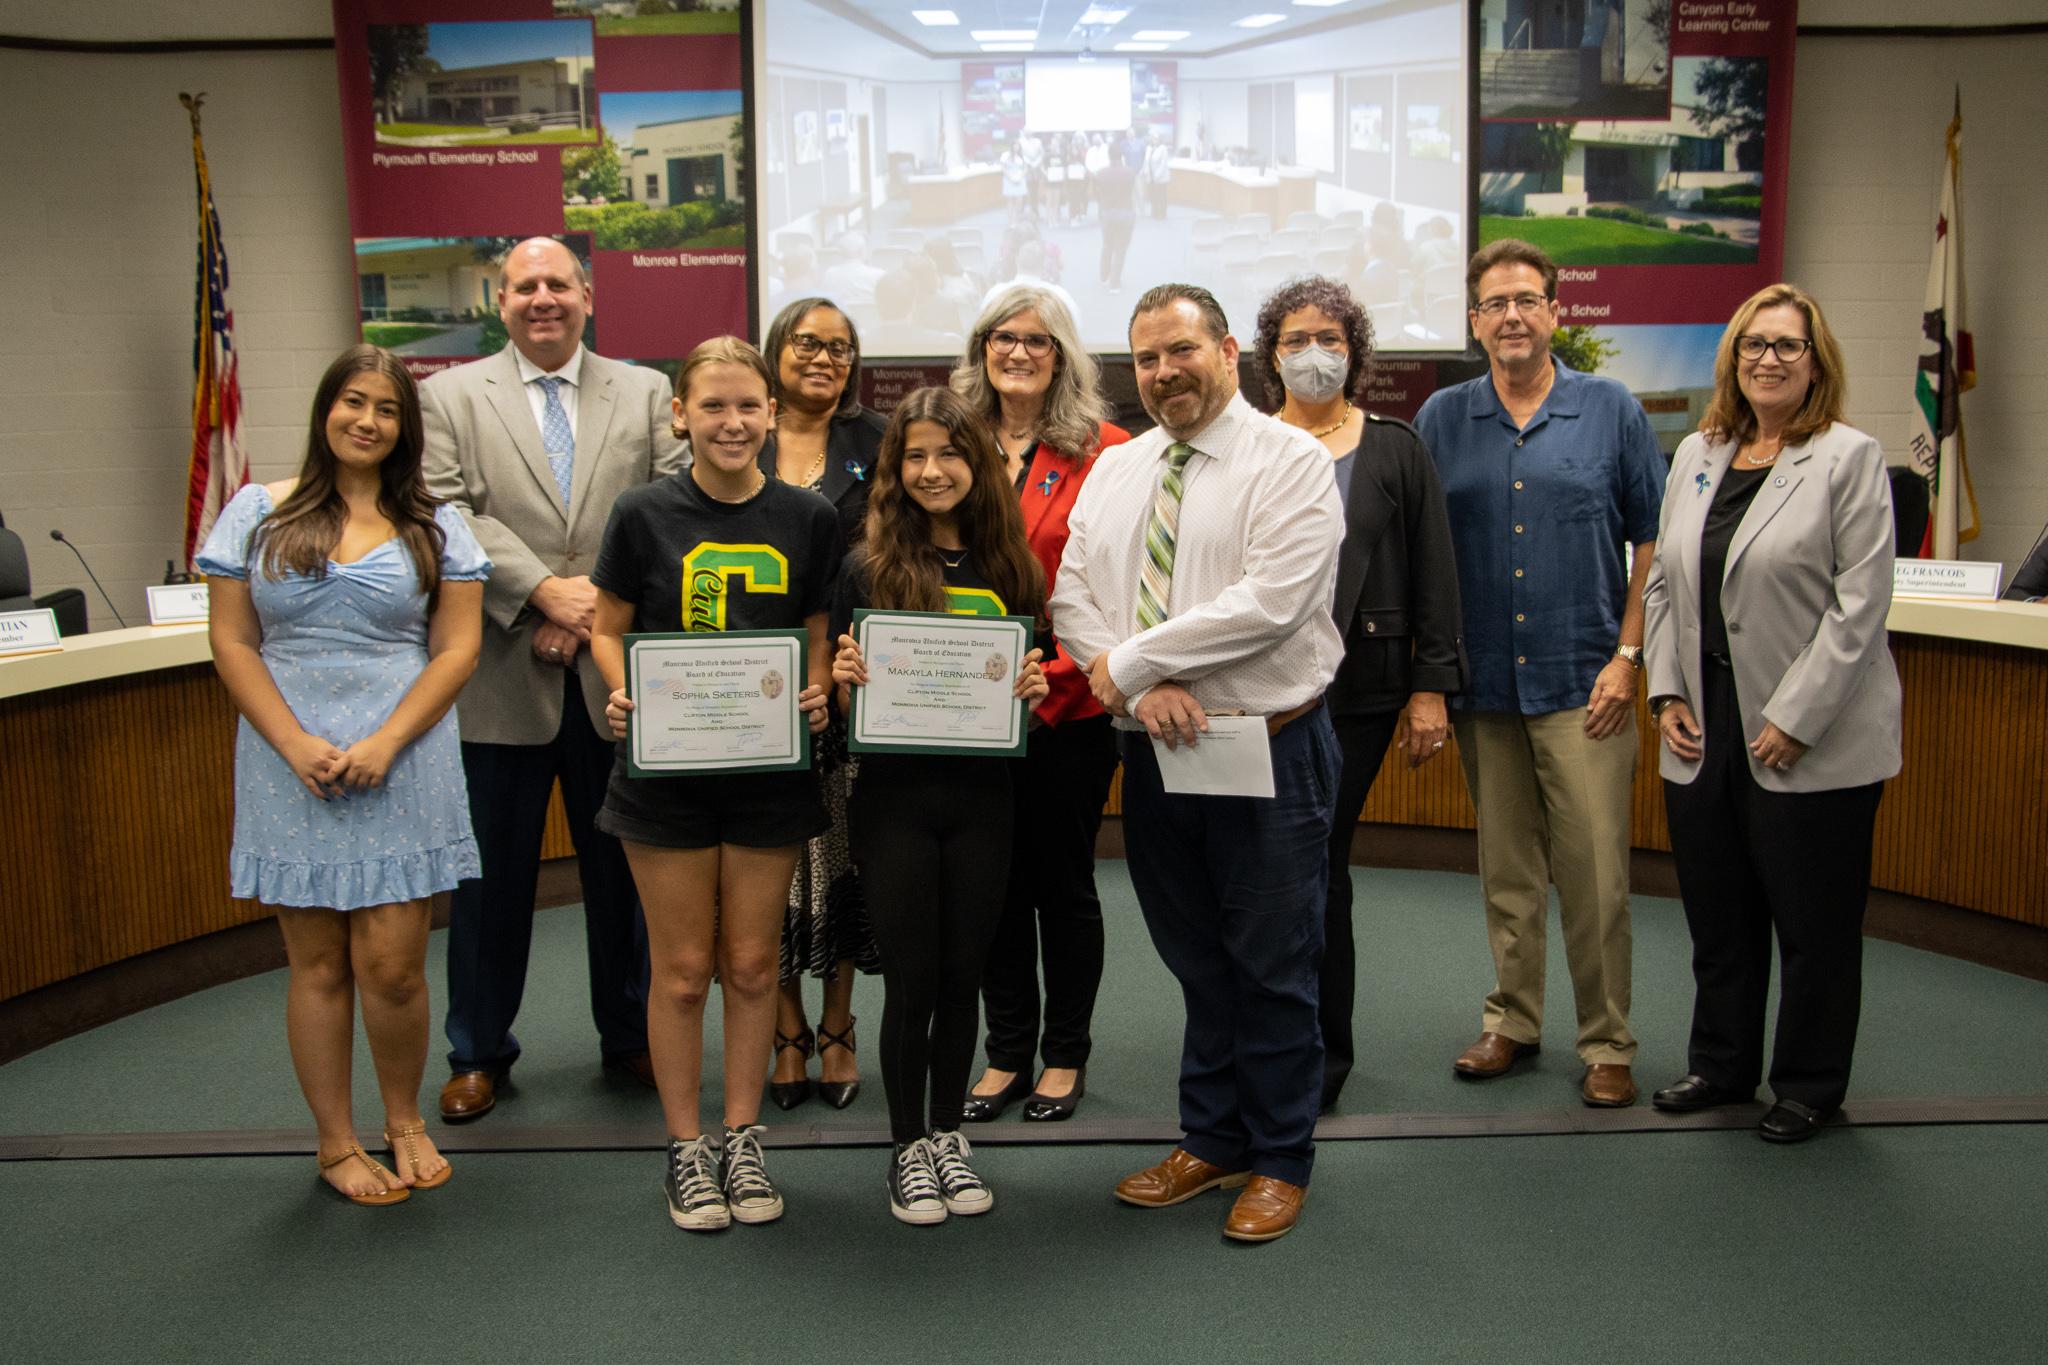 The Monrovia Unified Board of Education invited students from Clifton Middle School and Monrovia High School’s AP program to lead the Pledge of Allegiance at its September meetings.